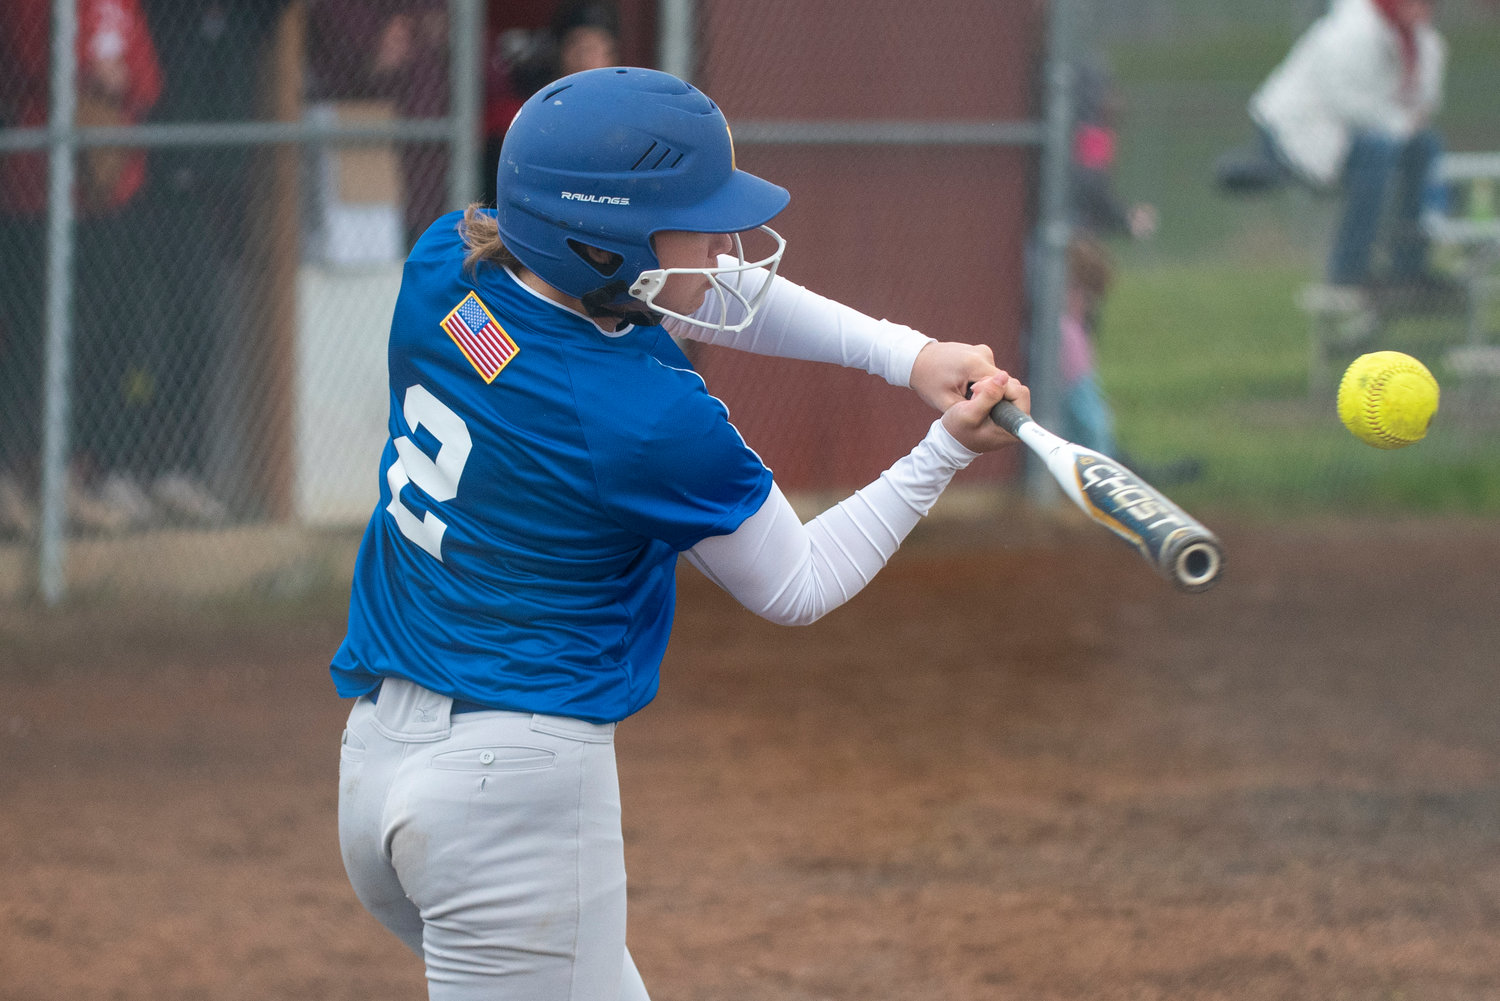 Adna's Ava Simms connects on a Winlock pitch during a road game on April 20.